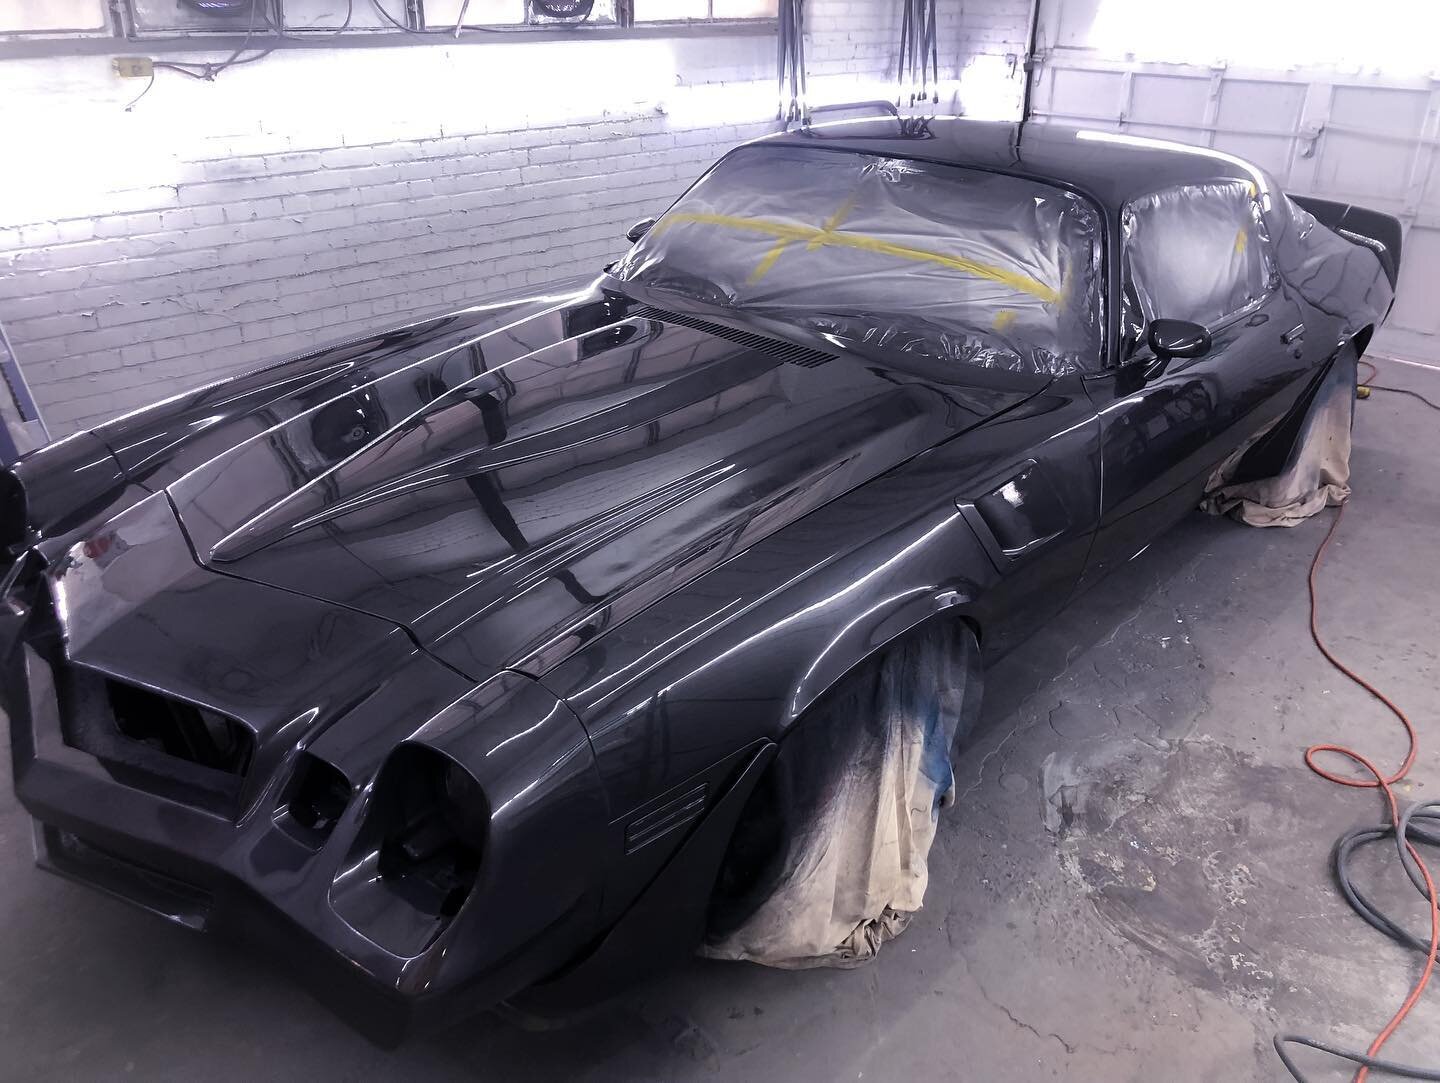 @collisionconceptsdfw getting ready for sealer and paint on this &lsquo;81 Z28 Camaro we have at the shop. Here are some before and after shots we got! 

#dfwspeedshop #dallascars #classiccars #camaros #z28 #z28camaro #freshpaintjob #bodyshop #speeds